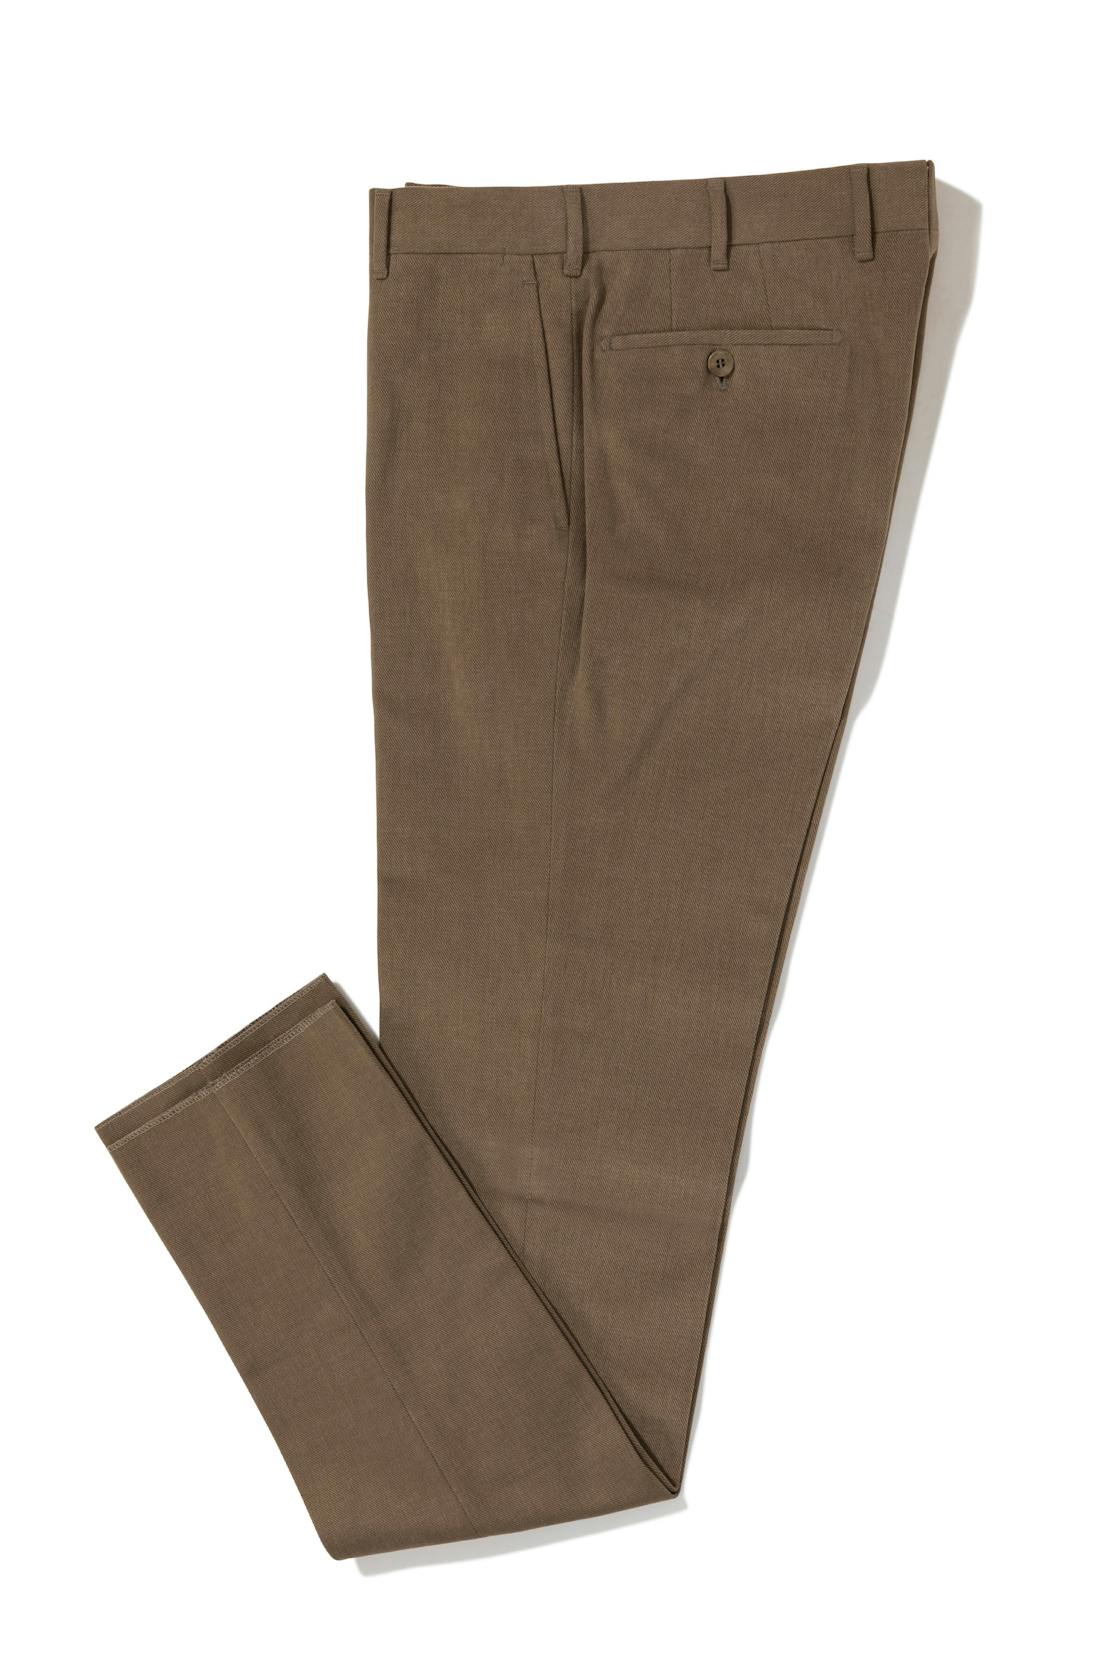 Rota 661P/3 Toffee Brushed Cotton Plain-front Trousers